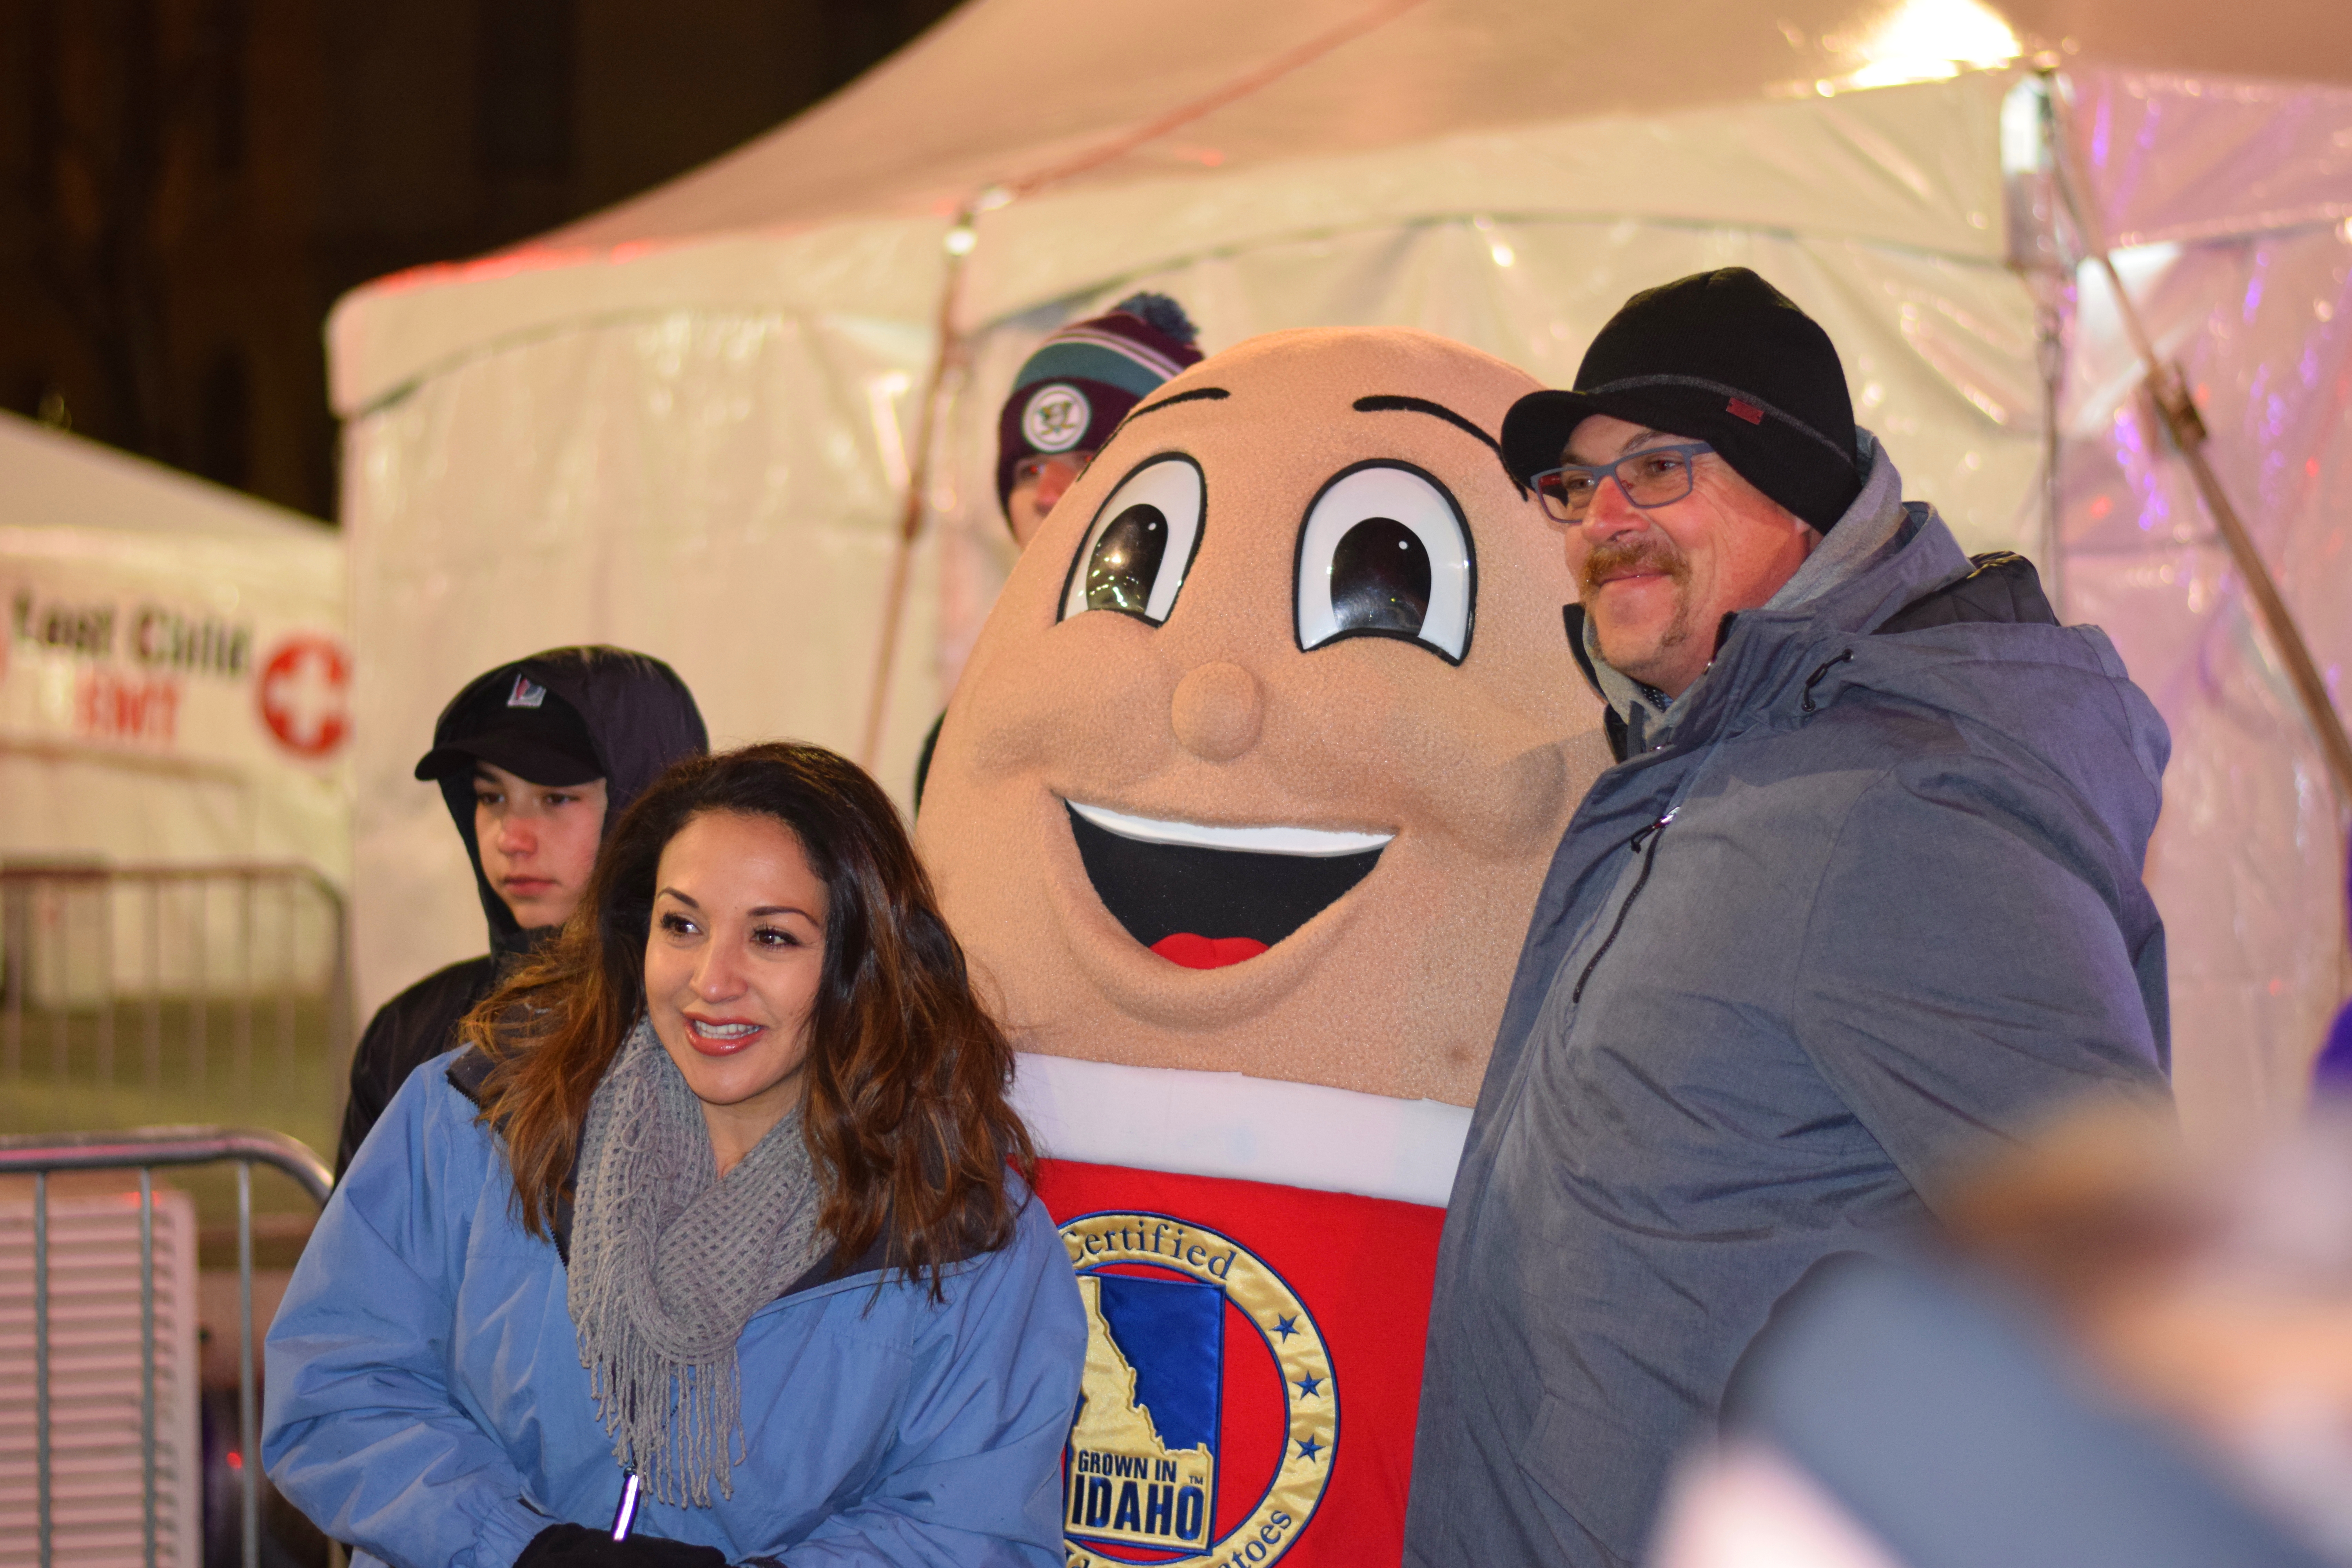 Pictures if the 2016 Idaho Potato Drop in Boise, Idaho. Photo by Terry Welch.